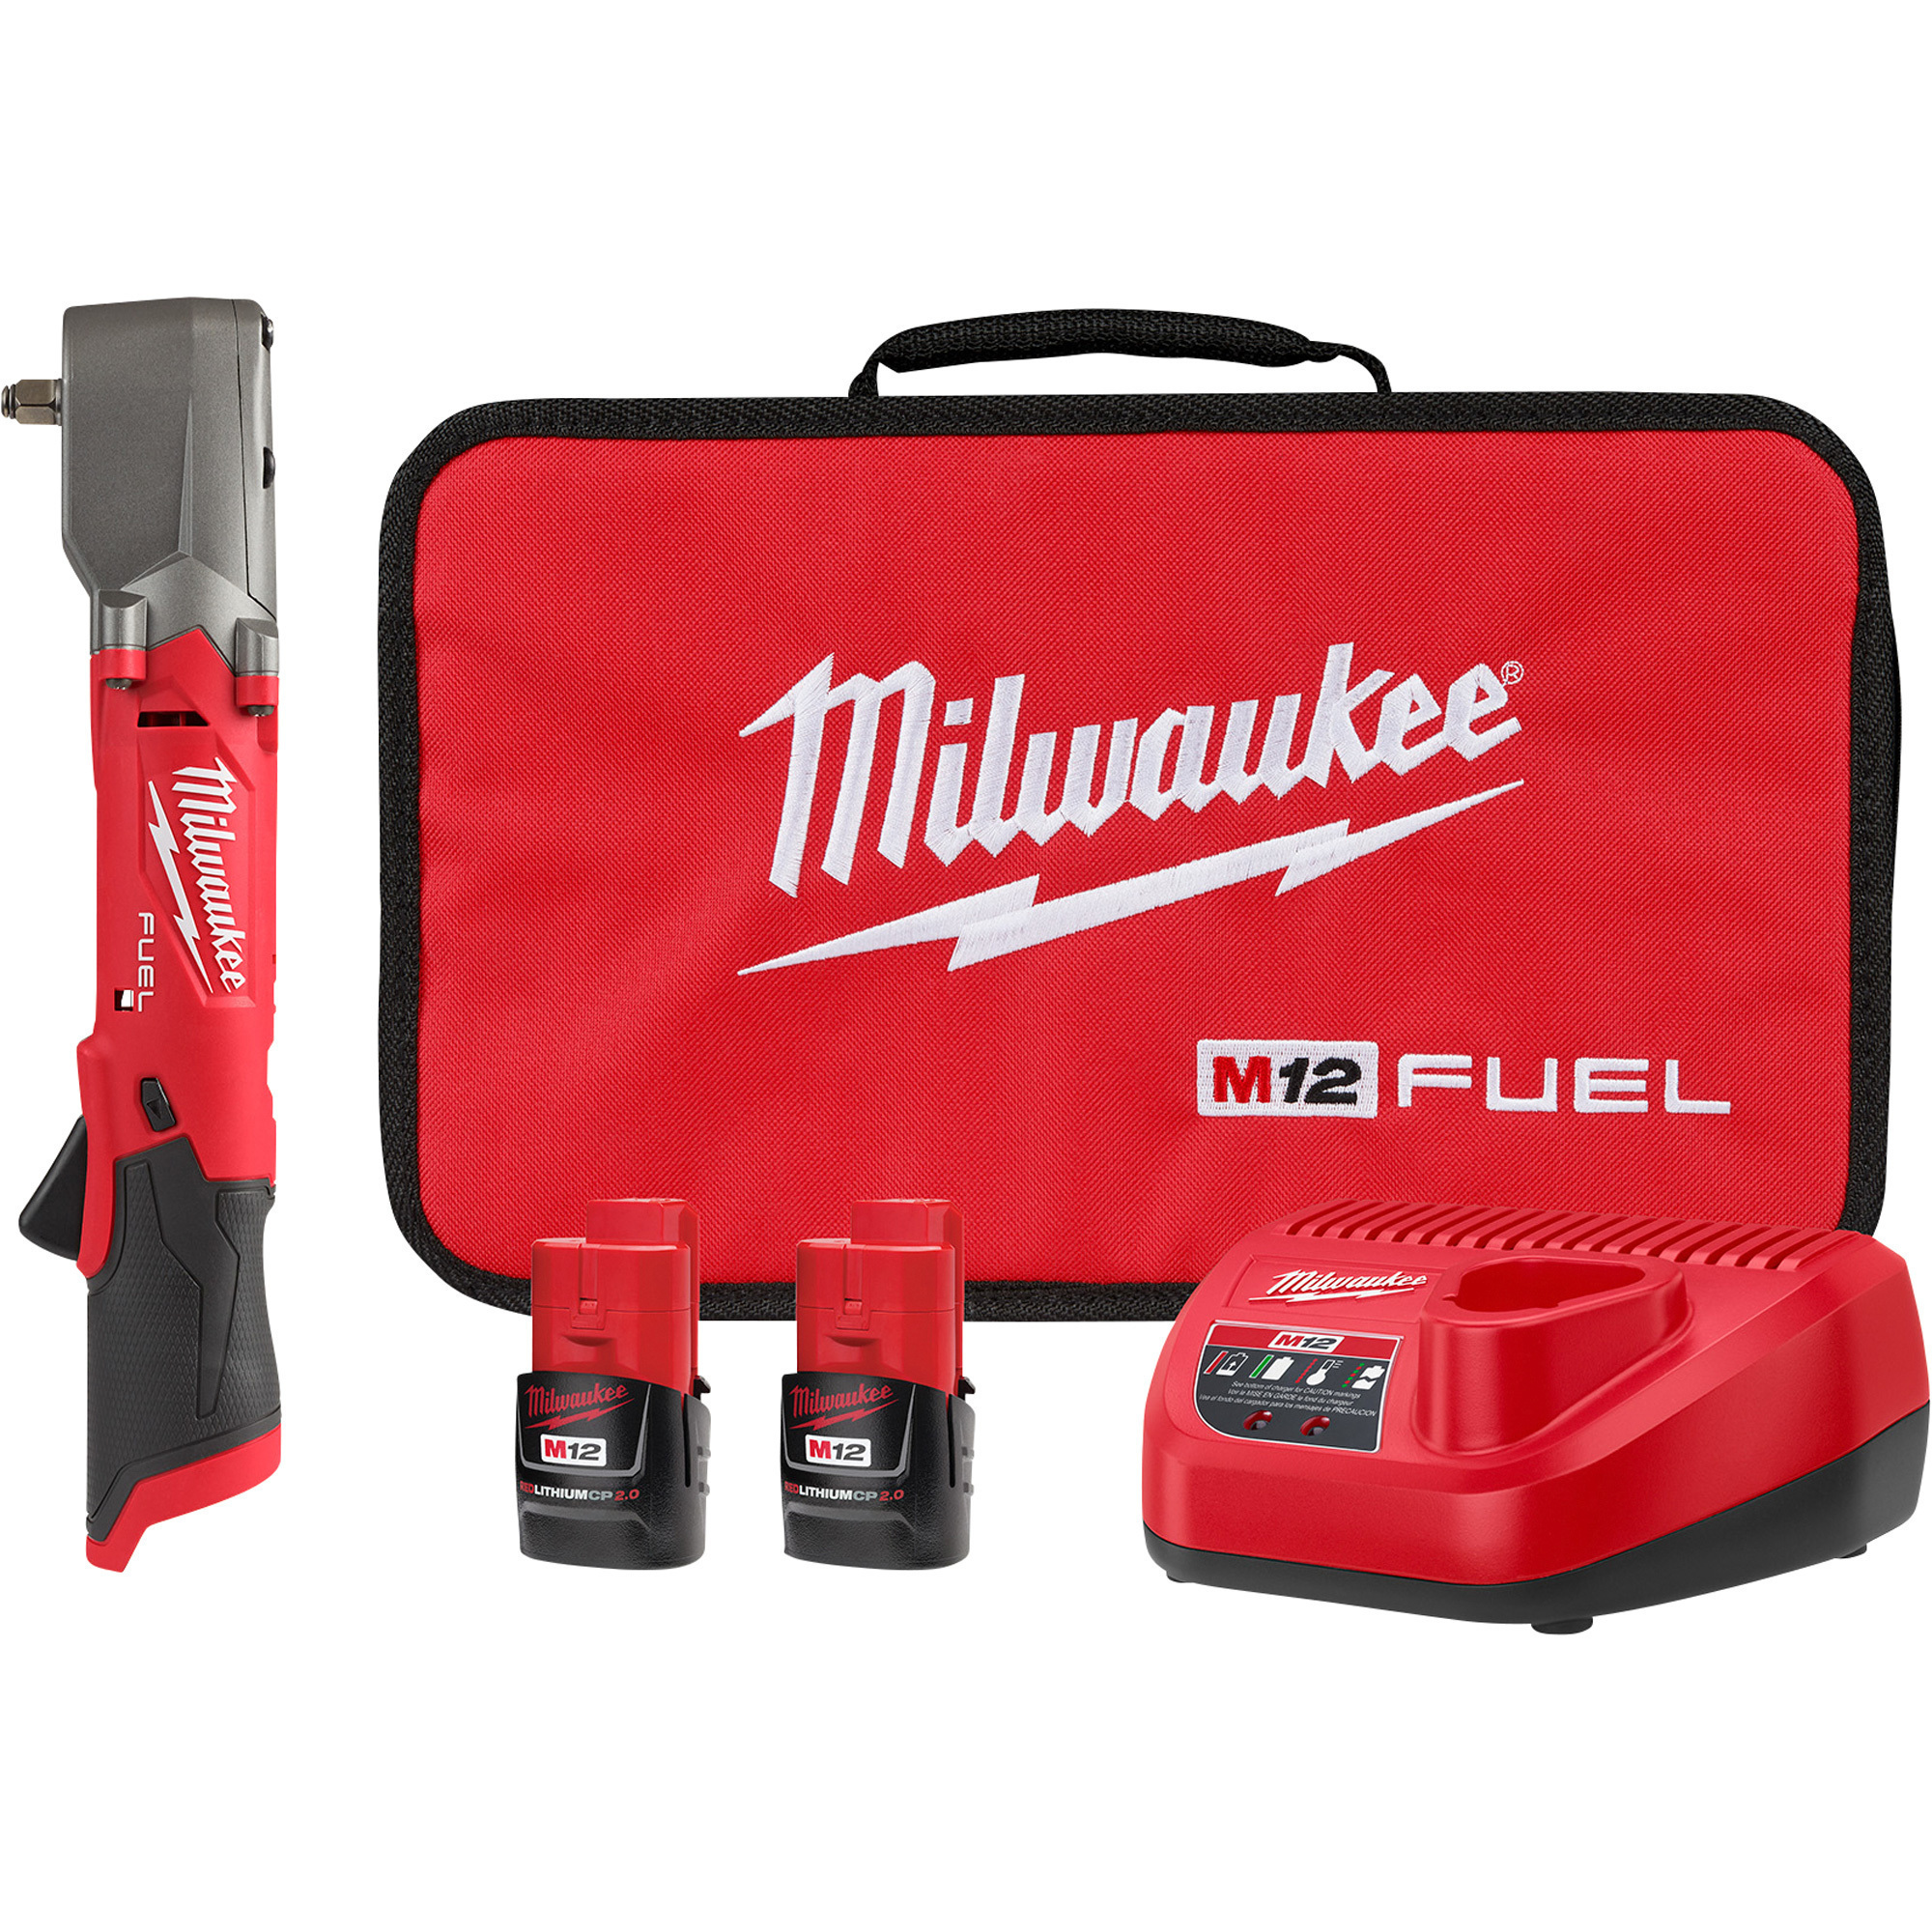 Milwaukee M12 FUEL Cordless Right Angle Impact Wrench with Friction Ring Kit, 3/8Inch Drive, 220 Ft./Lbs. Torque, 2 Batteries, Model 2564-22